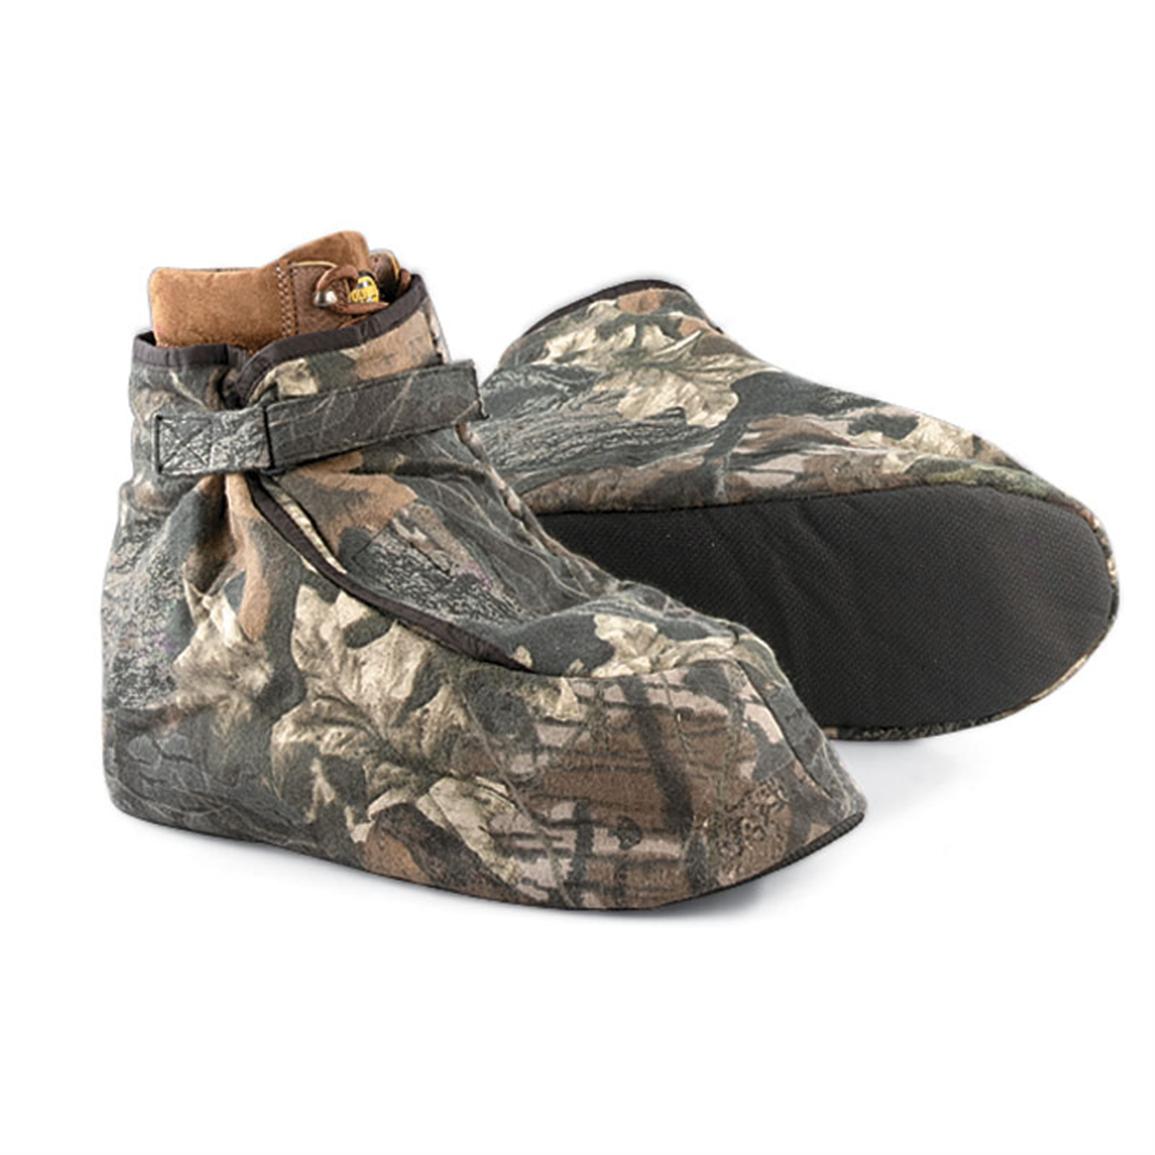 insulated shoe covers